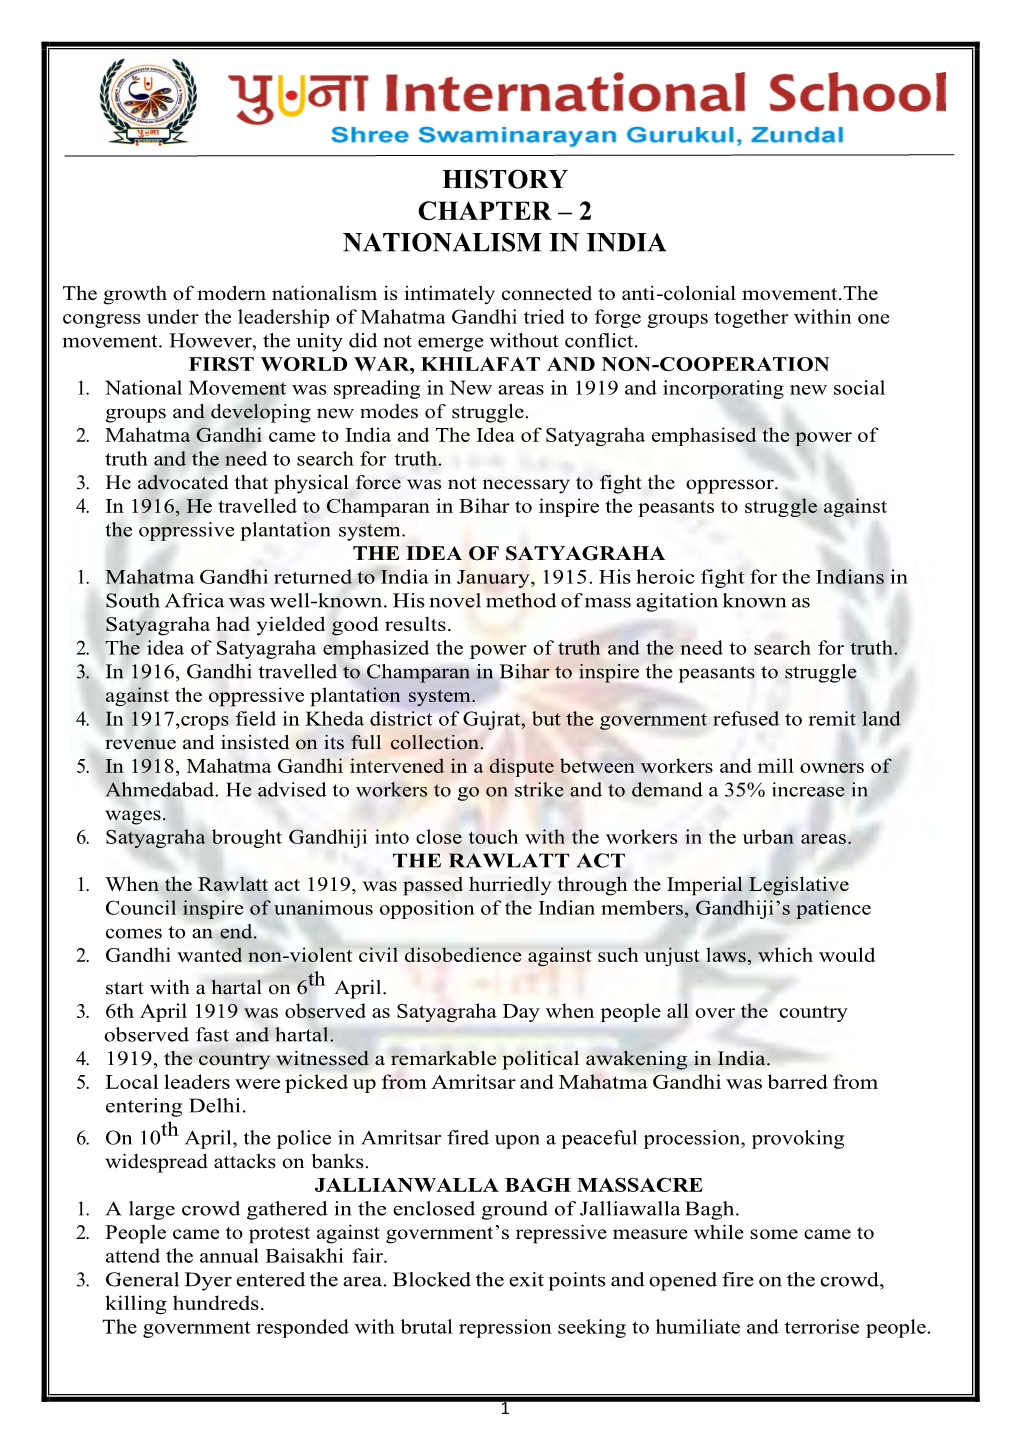 History Chapter – 2 Nationalism in India